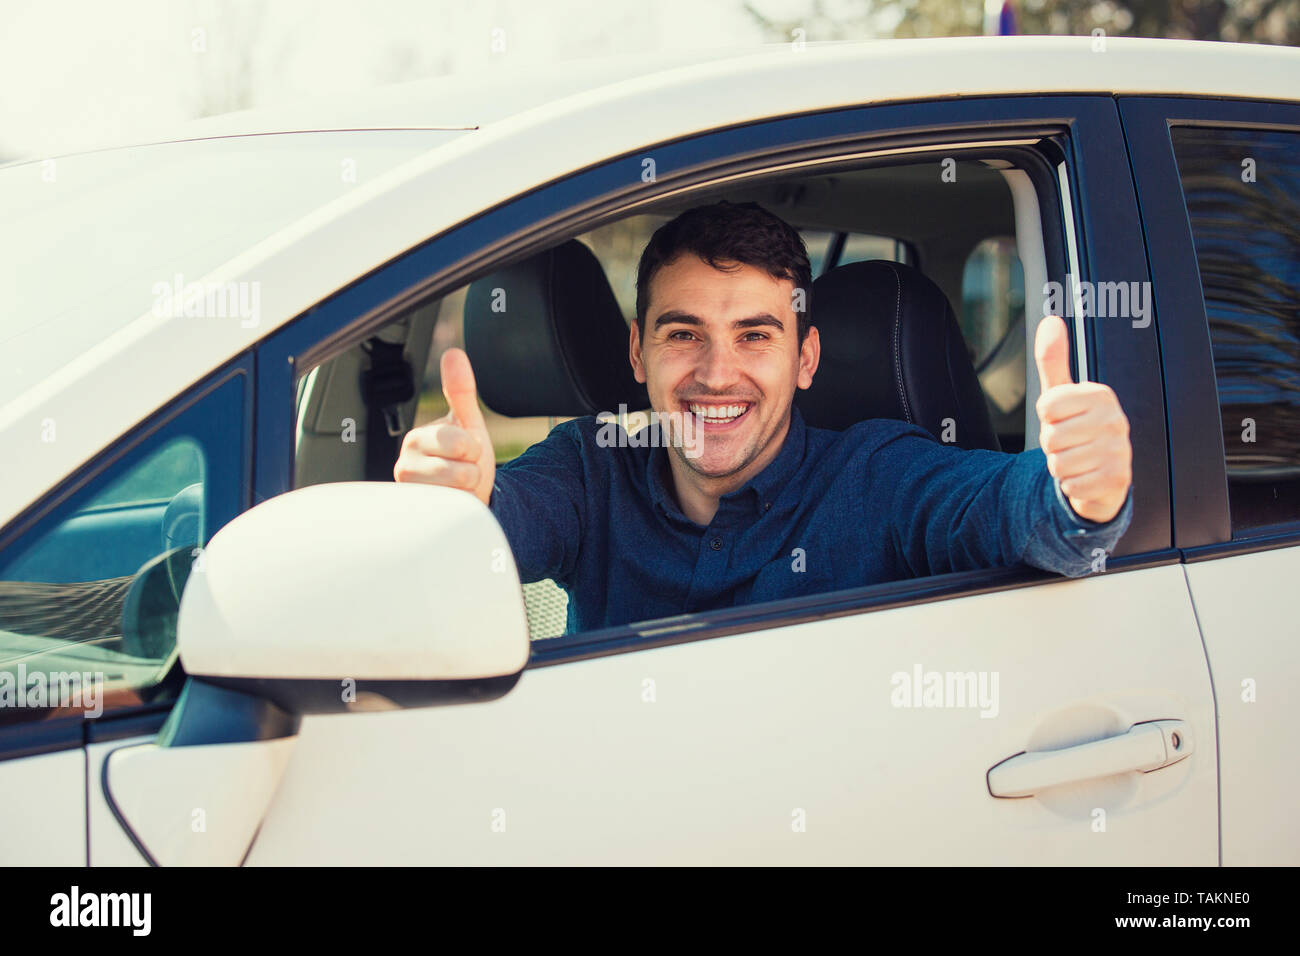 Excited casual guy sitting behind the steering wheel of the car showing thumbs up gesture as has passed the exam and obtain driver license. Proud succ Stock Photo